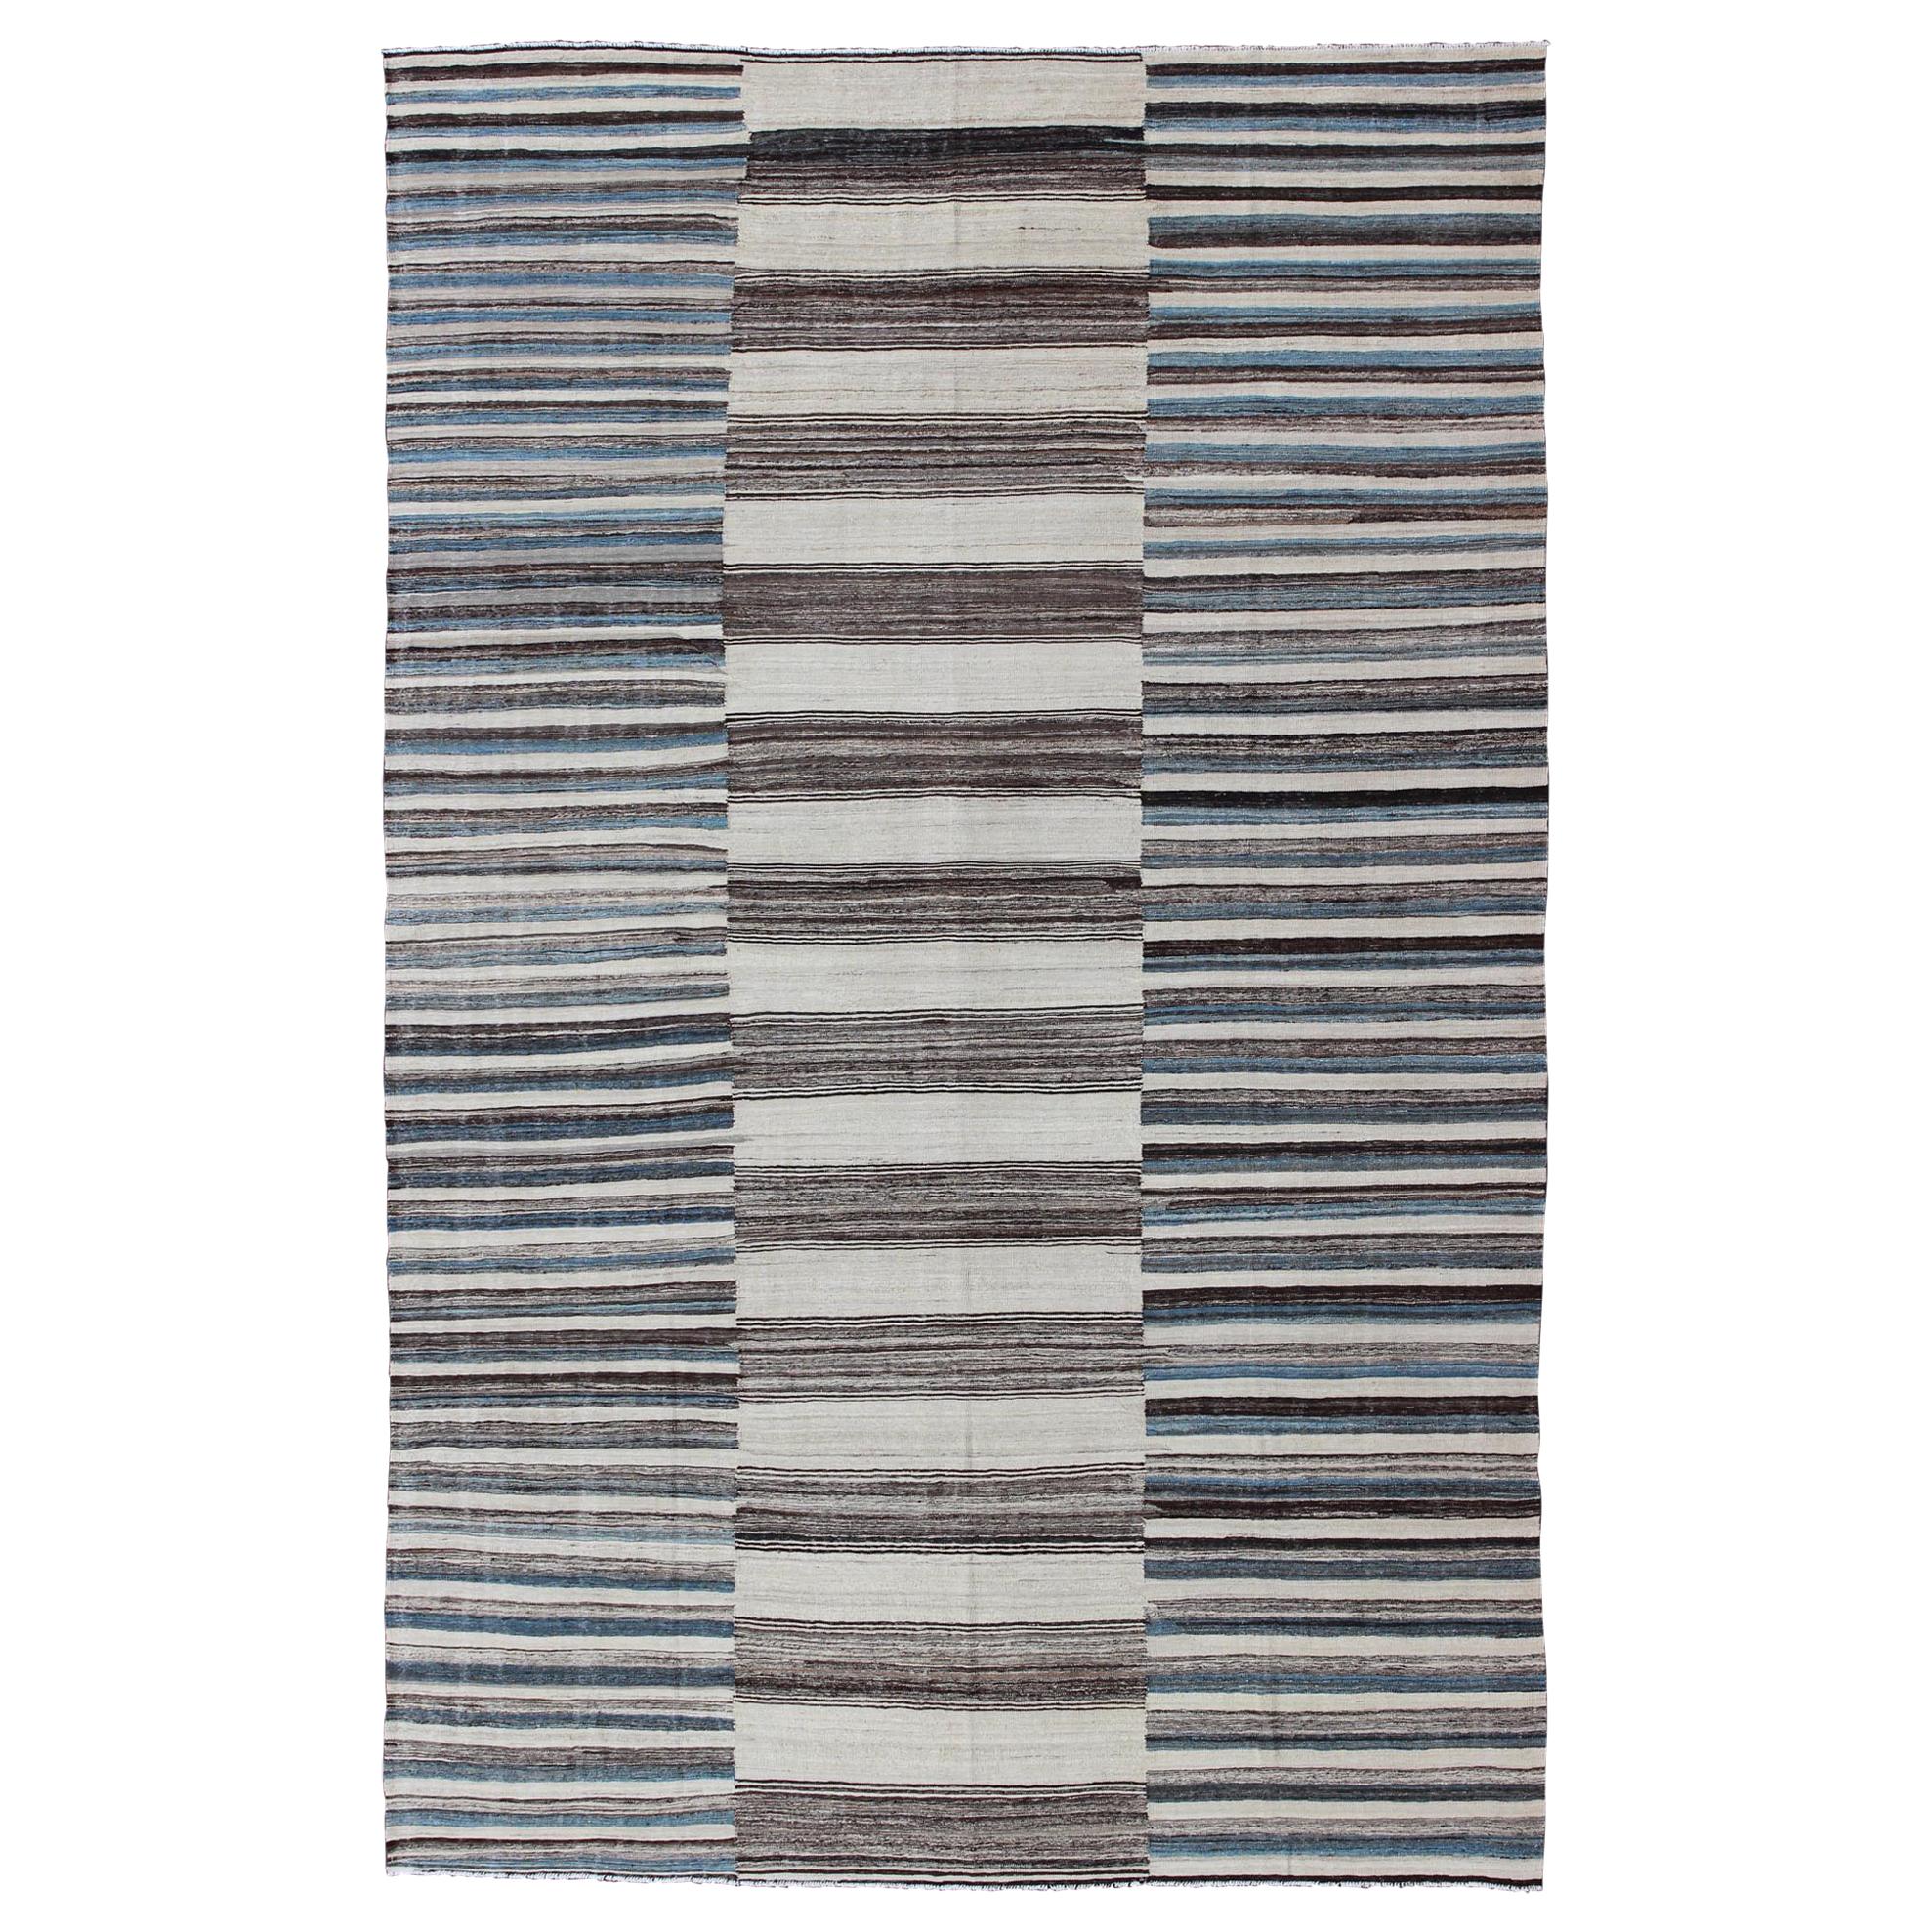 Modern Flat-Weave Large Kilim with Blue, Ivory, Brown and Charcoal Stripes